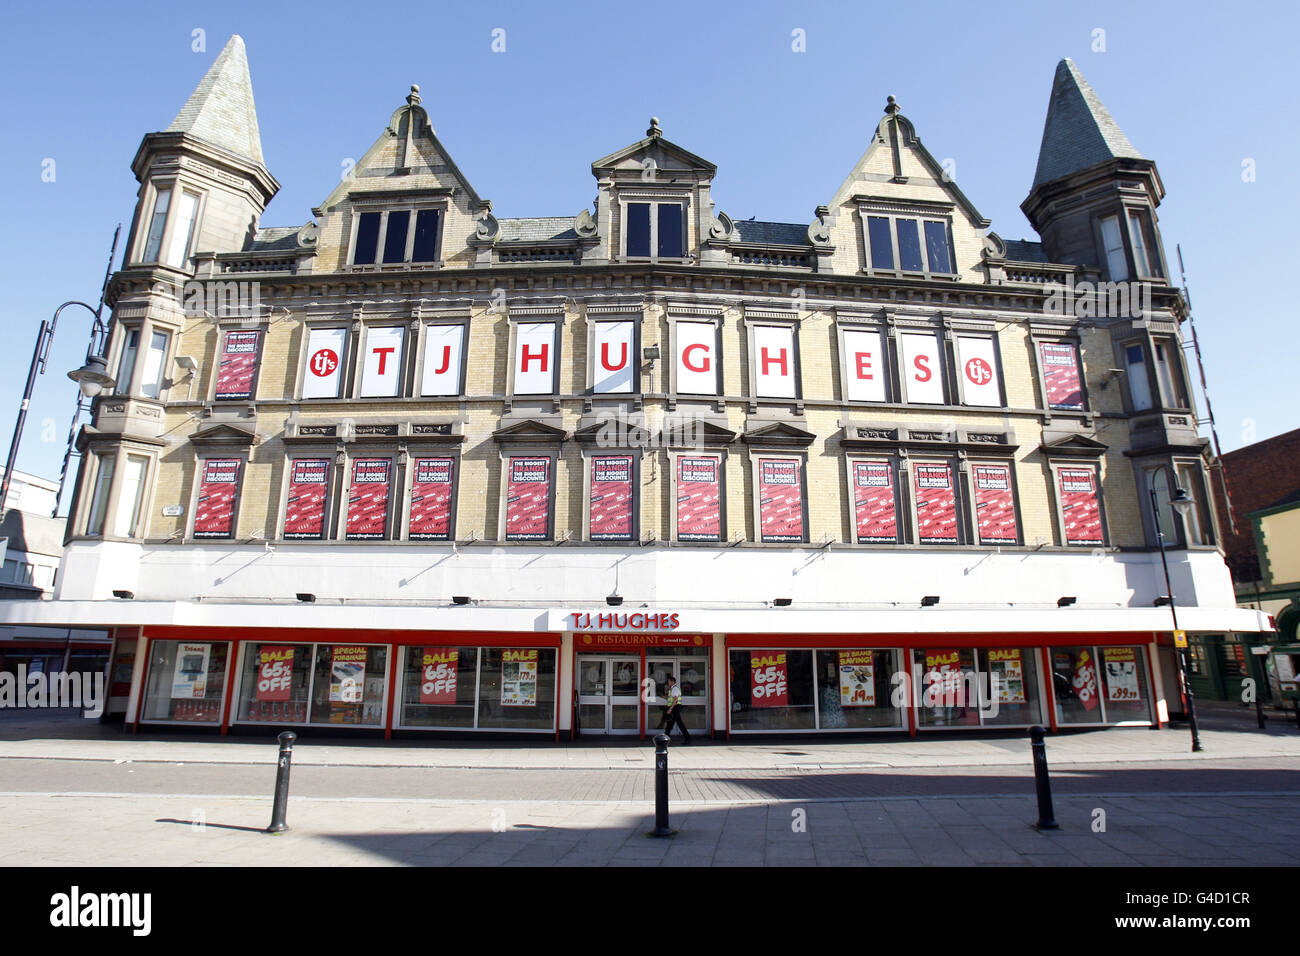 A branch in Liverpool of the department store chain TJ Hughes which, according to reports, has given official notice that it intends to appoint an administrator over the next 10 days, according to reports. Stock Photo